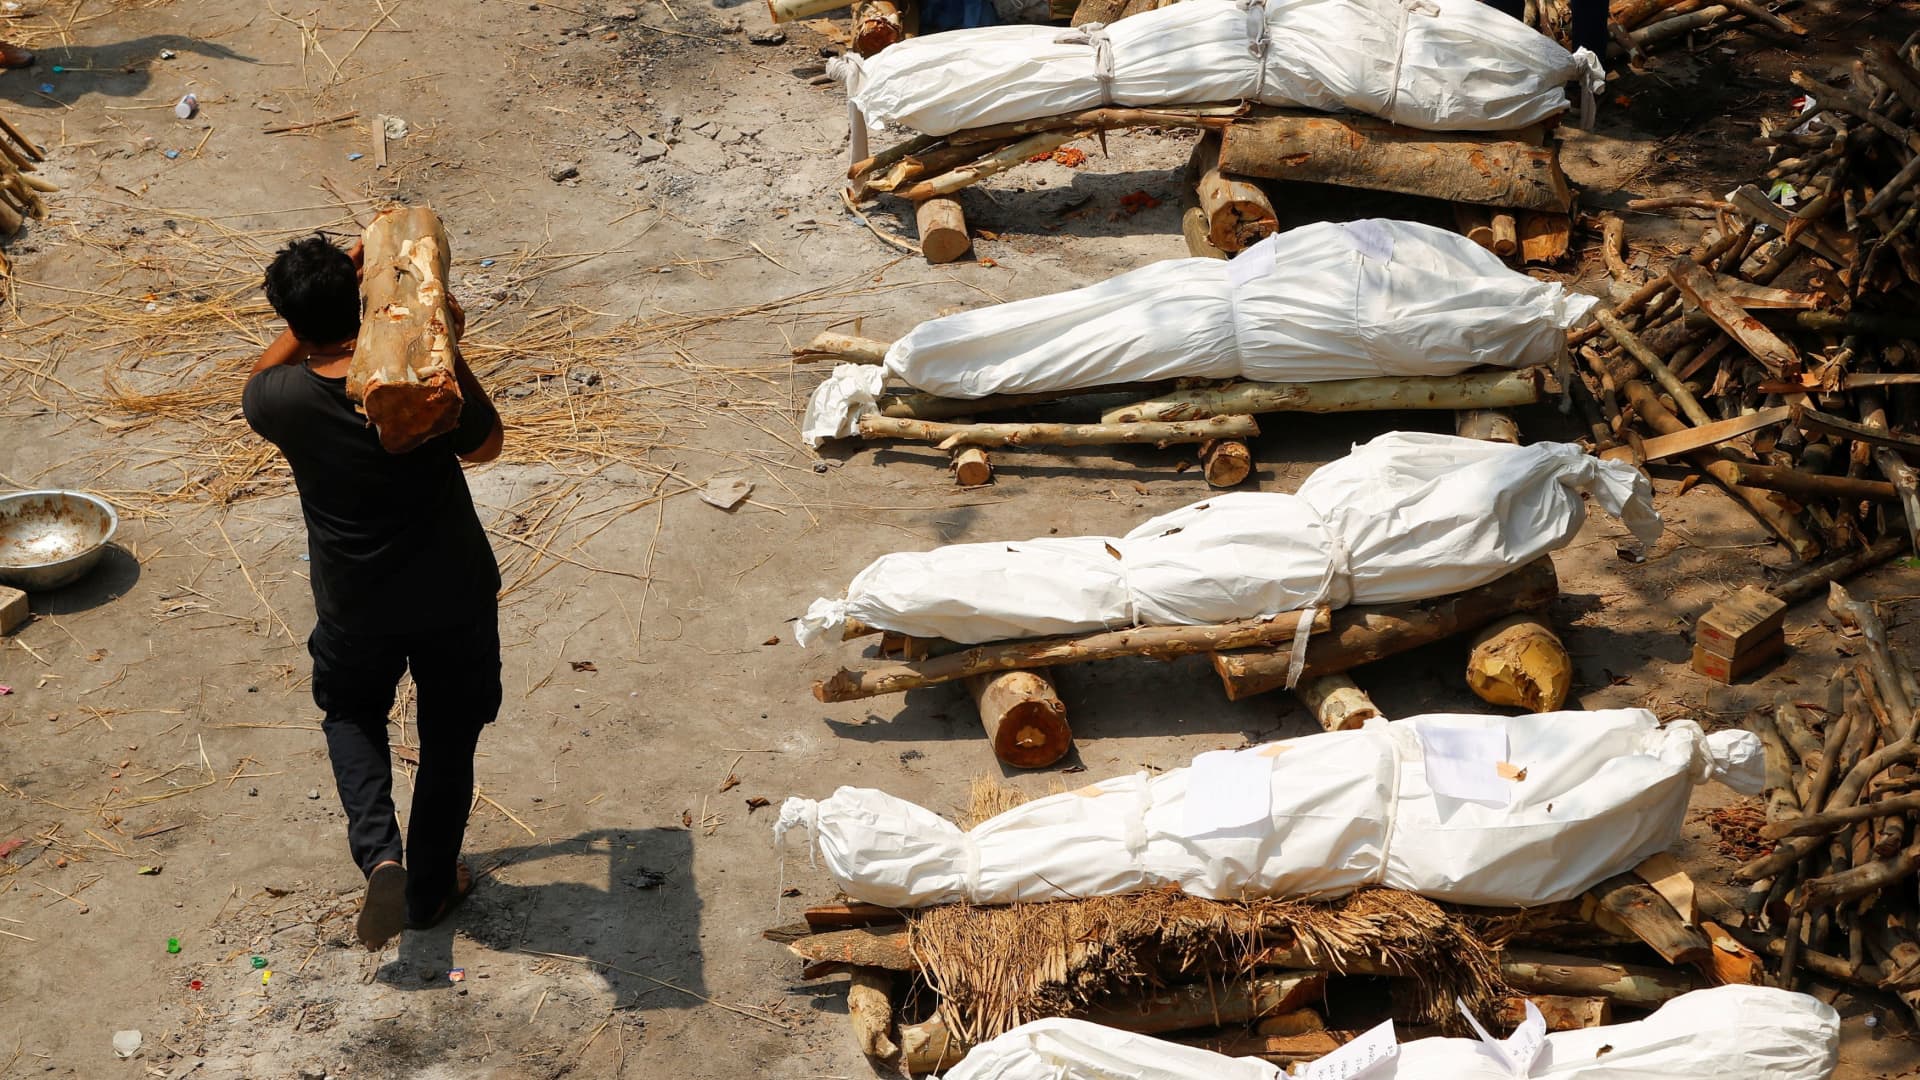 A man carrying wood walks past the funeral pyres of those who died from the coronavirus disease (COVID-19), during a mass cremation, at a crematorium in New Delhi, India April 26, 2021.